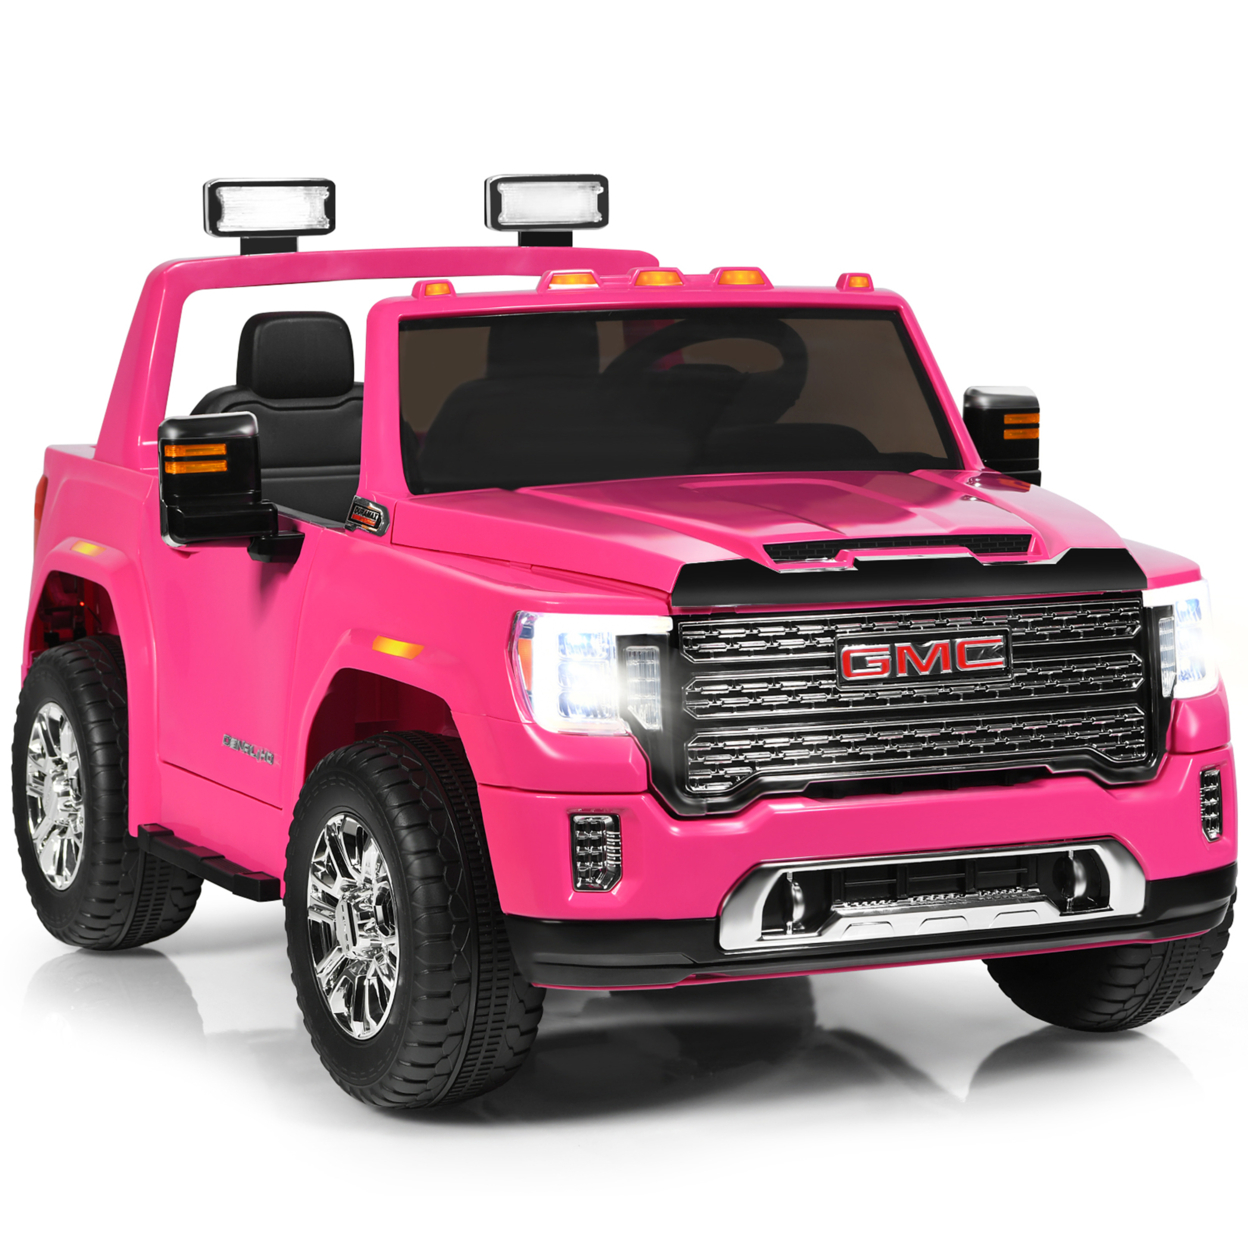 12V Licensed GMC Kids Ride On Car 2-Seater Truck W/ Remote Control - Pink